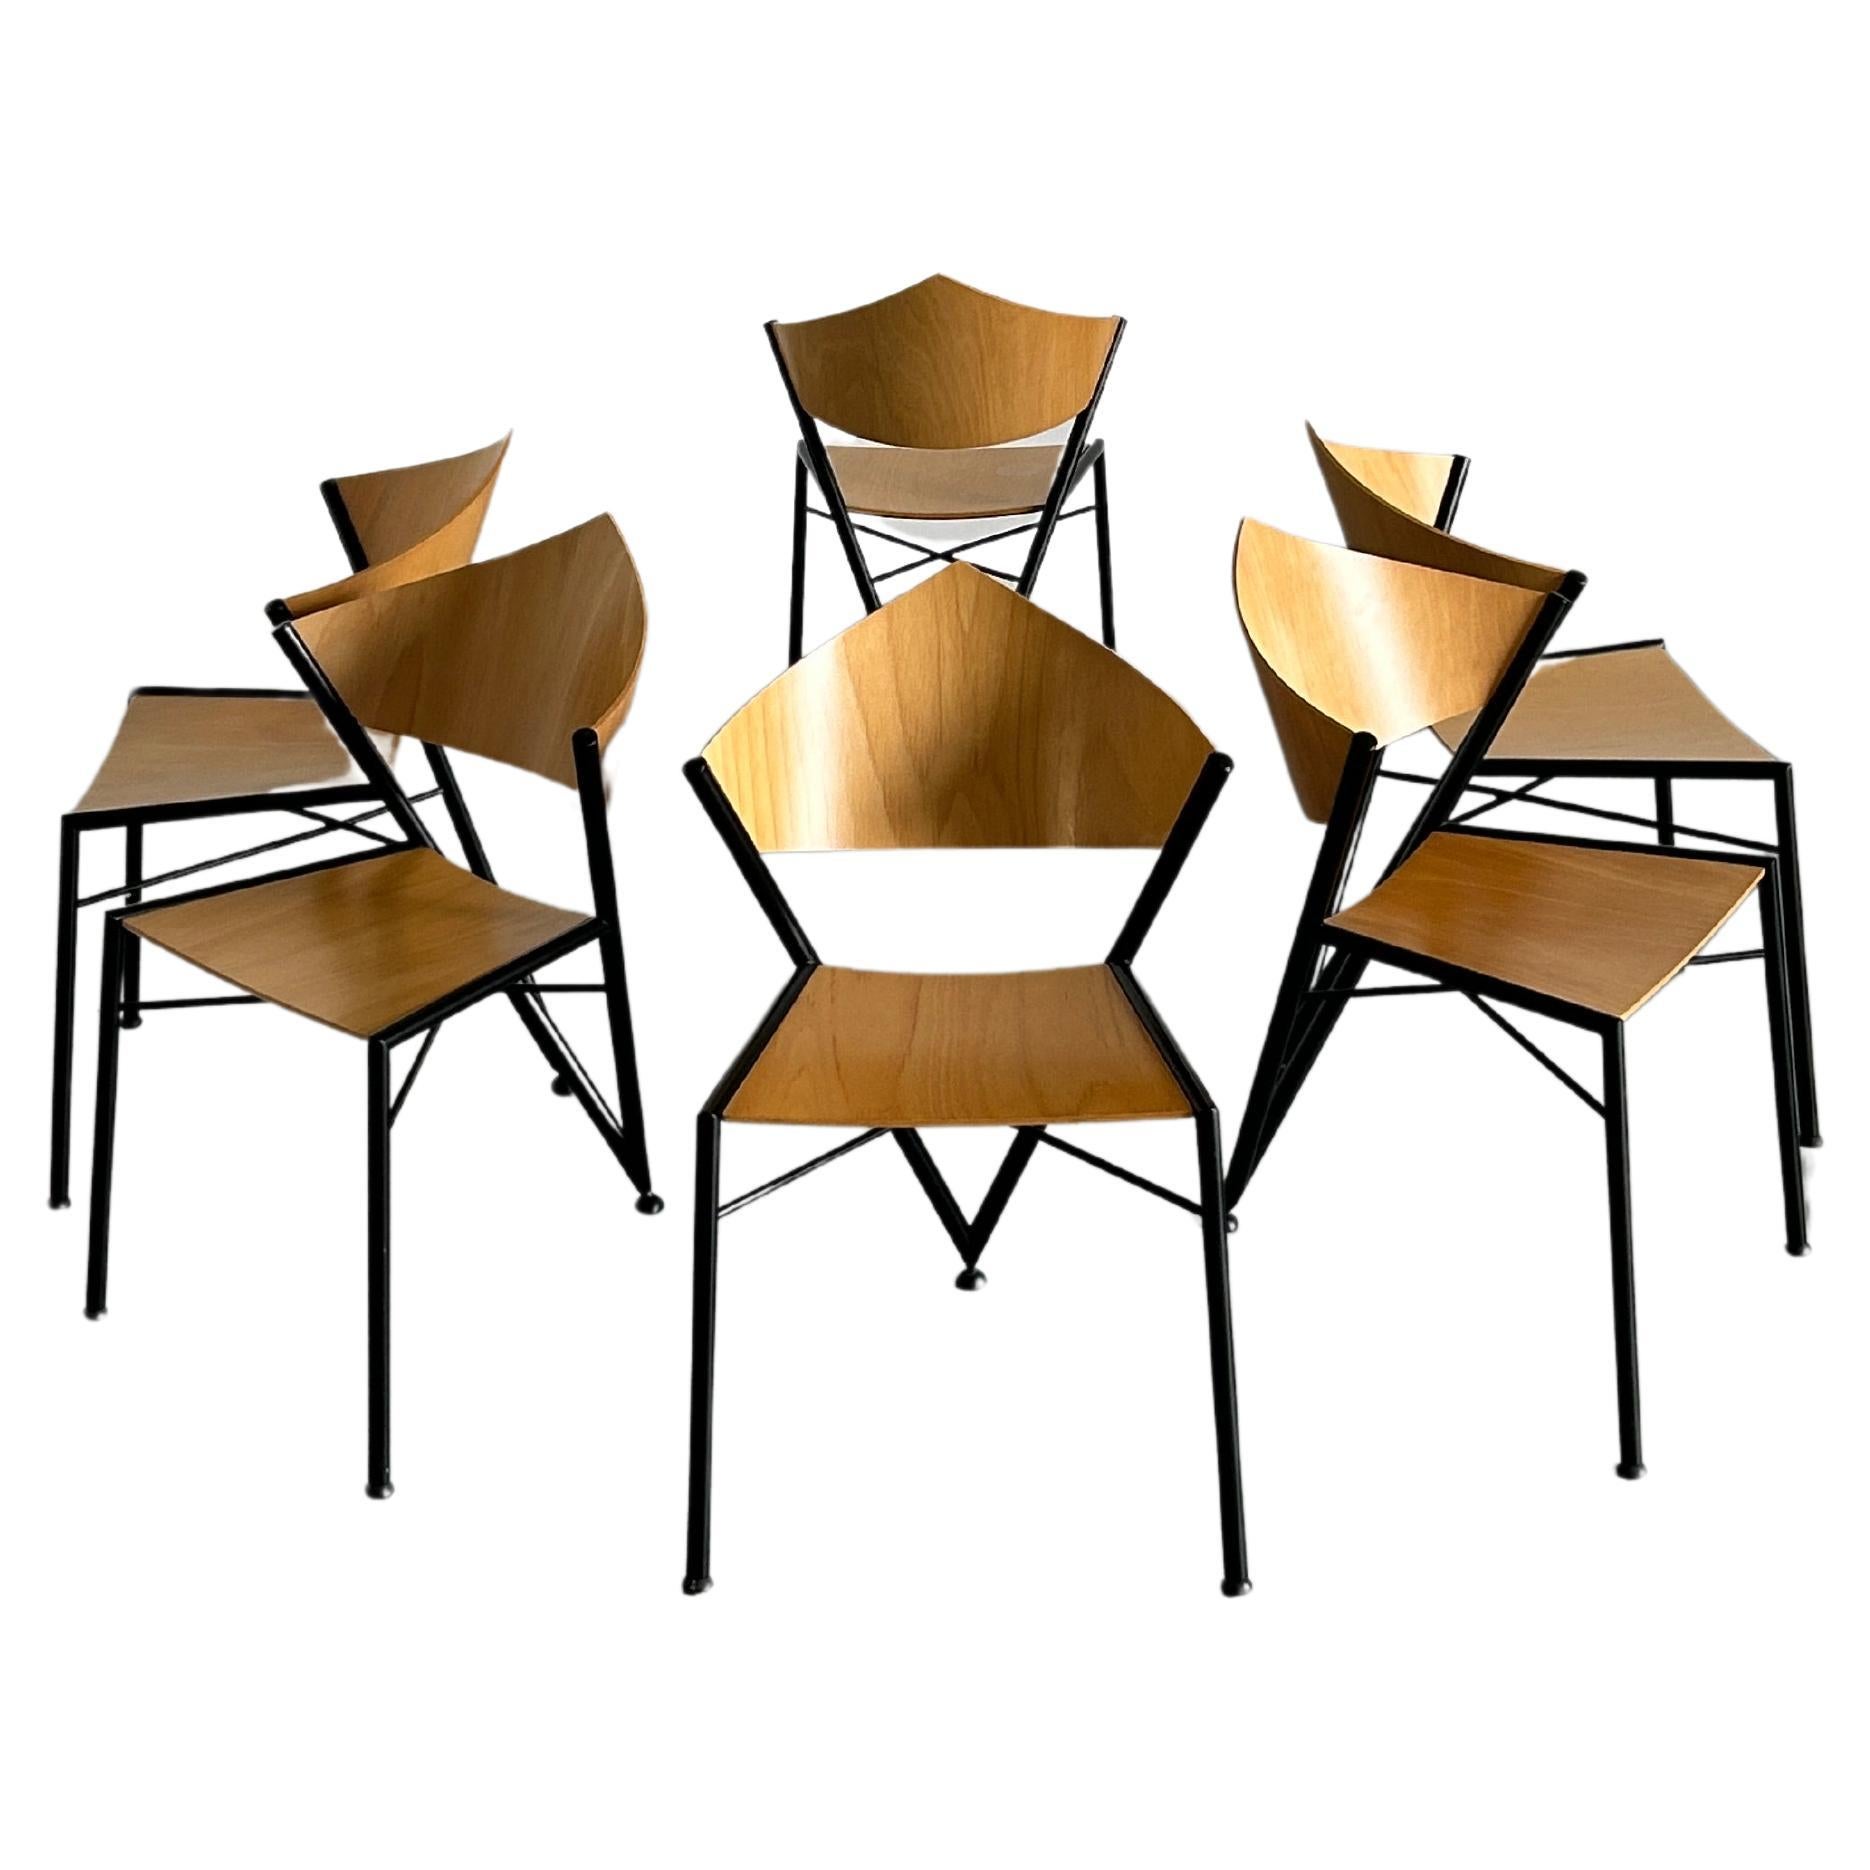 1 of 6 Postmodern Metal Framed Plywood Chairs, Memphis Design, 1980s Italy